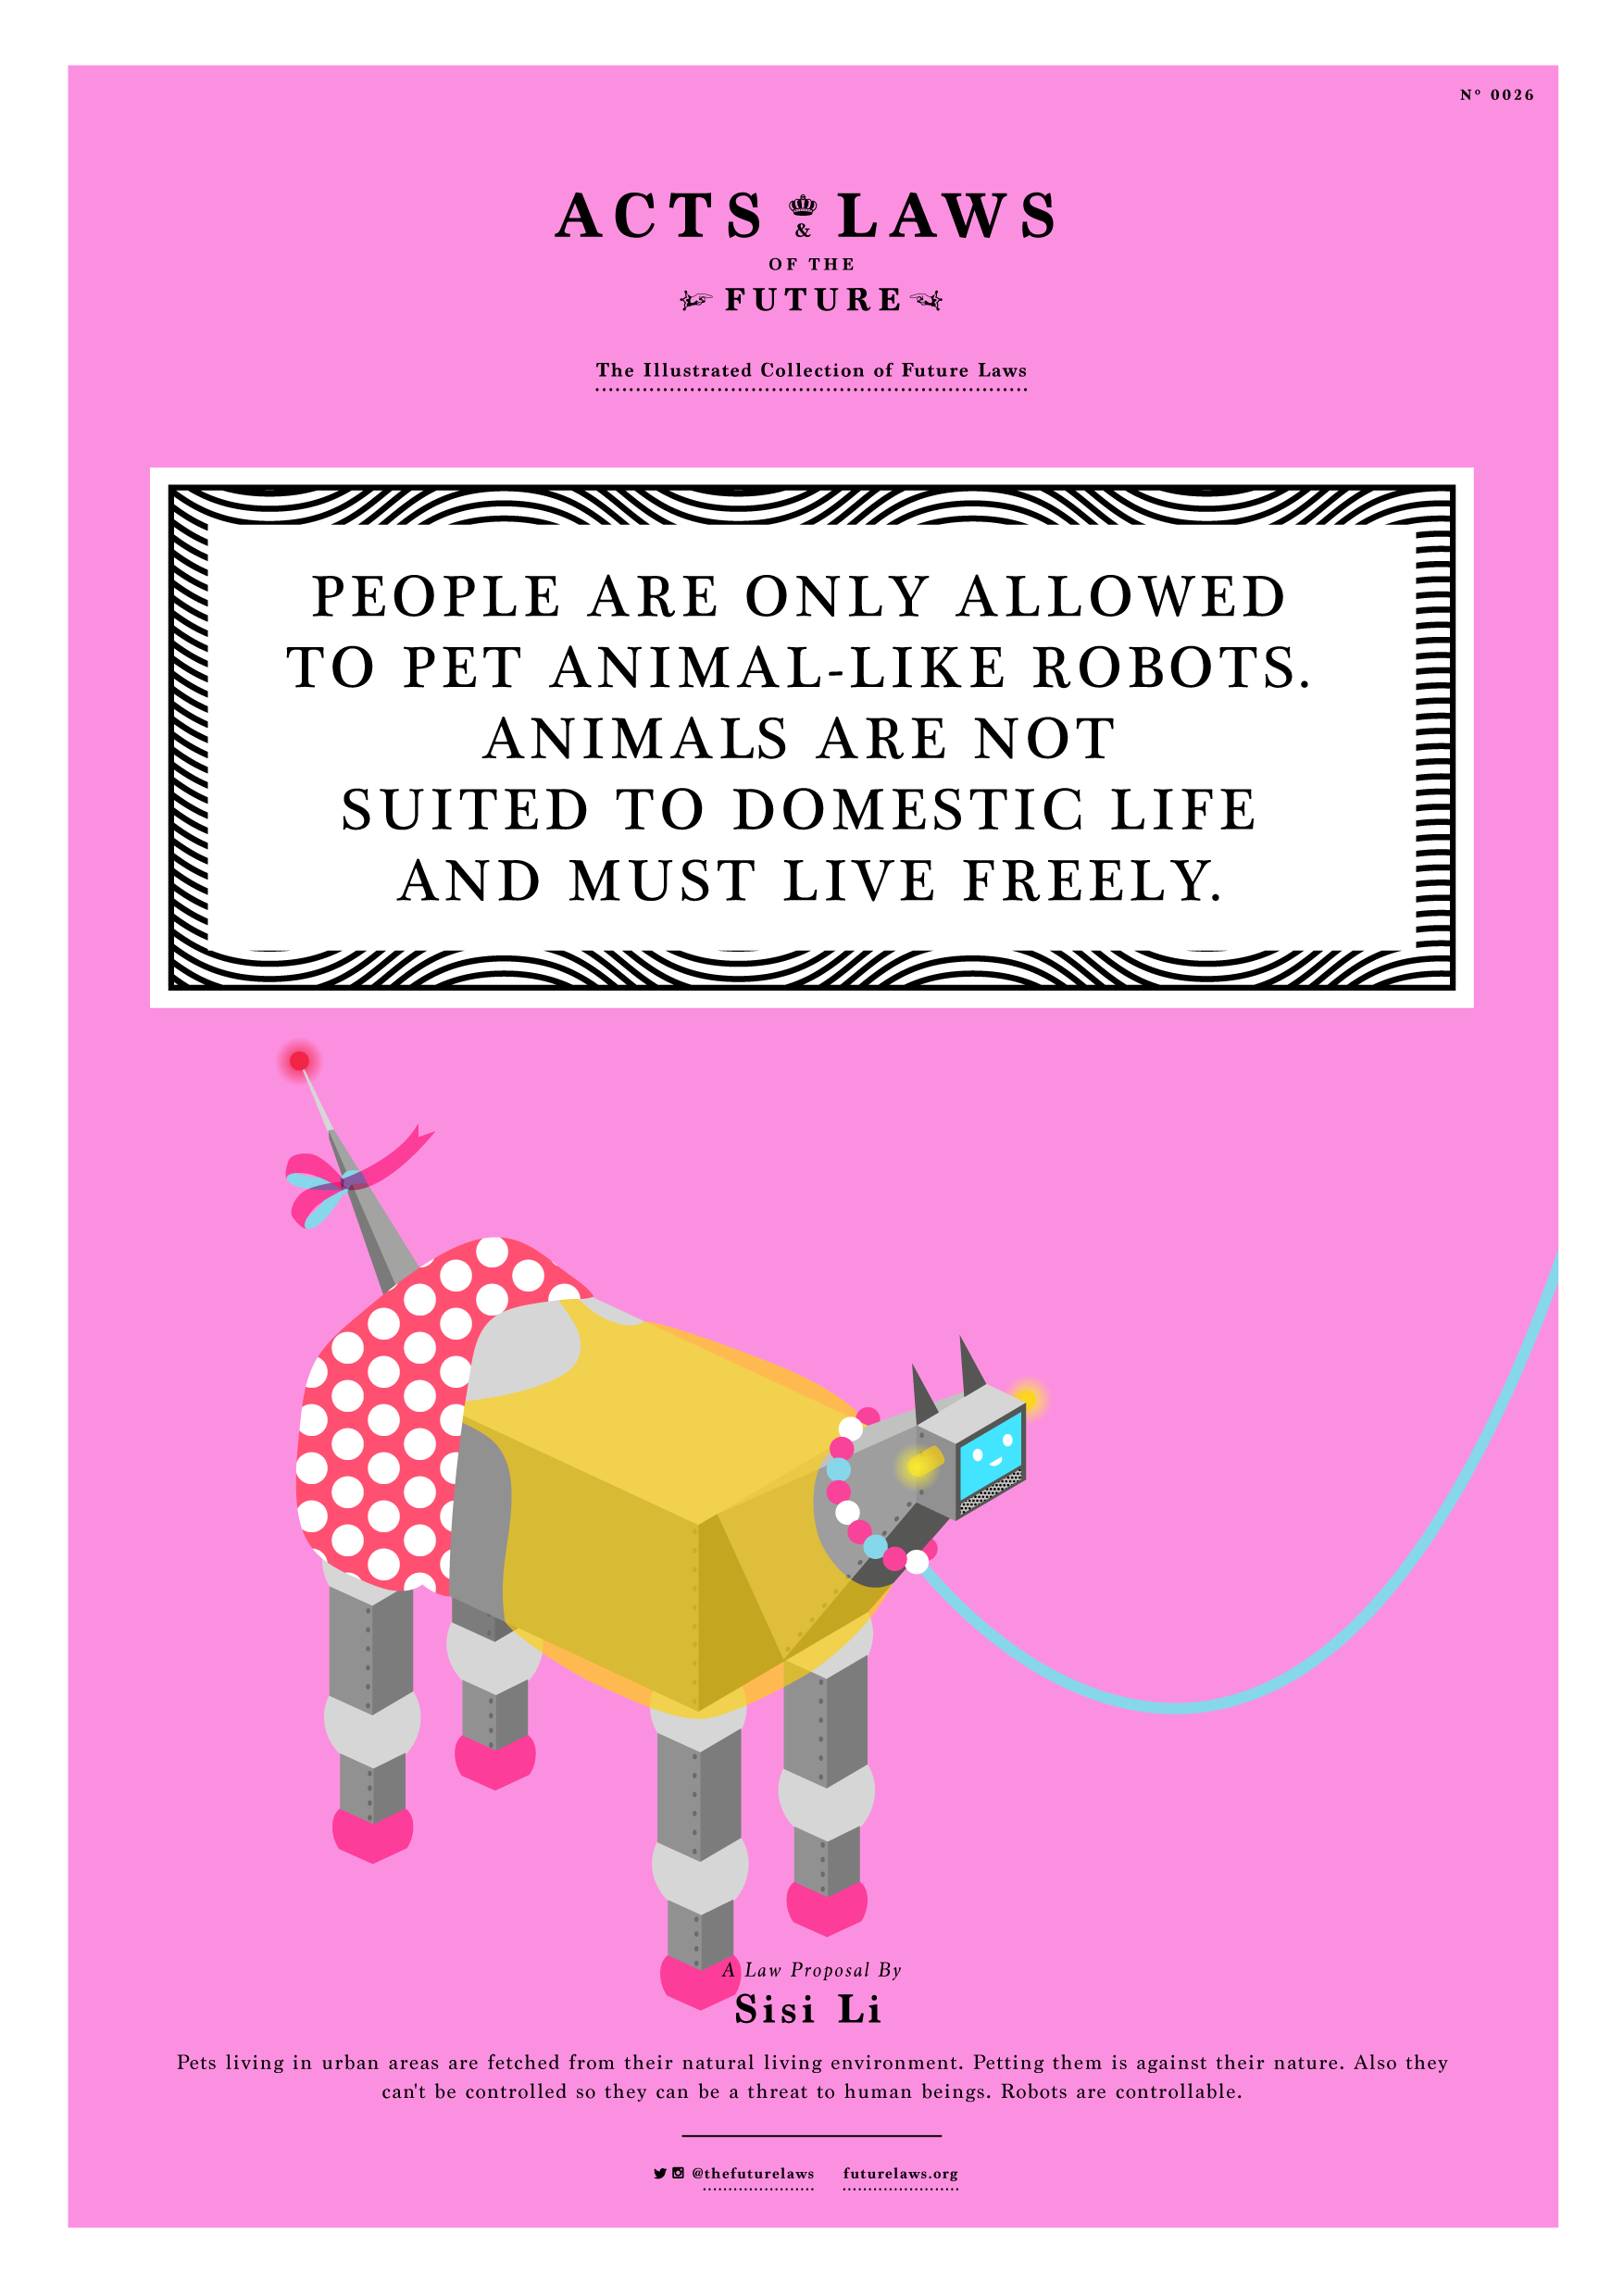 People are only allowed to pet animal-like robots.  Animals are not suited to domestic life and must live freely.